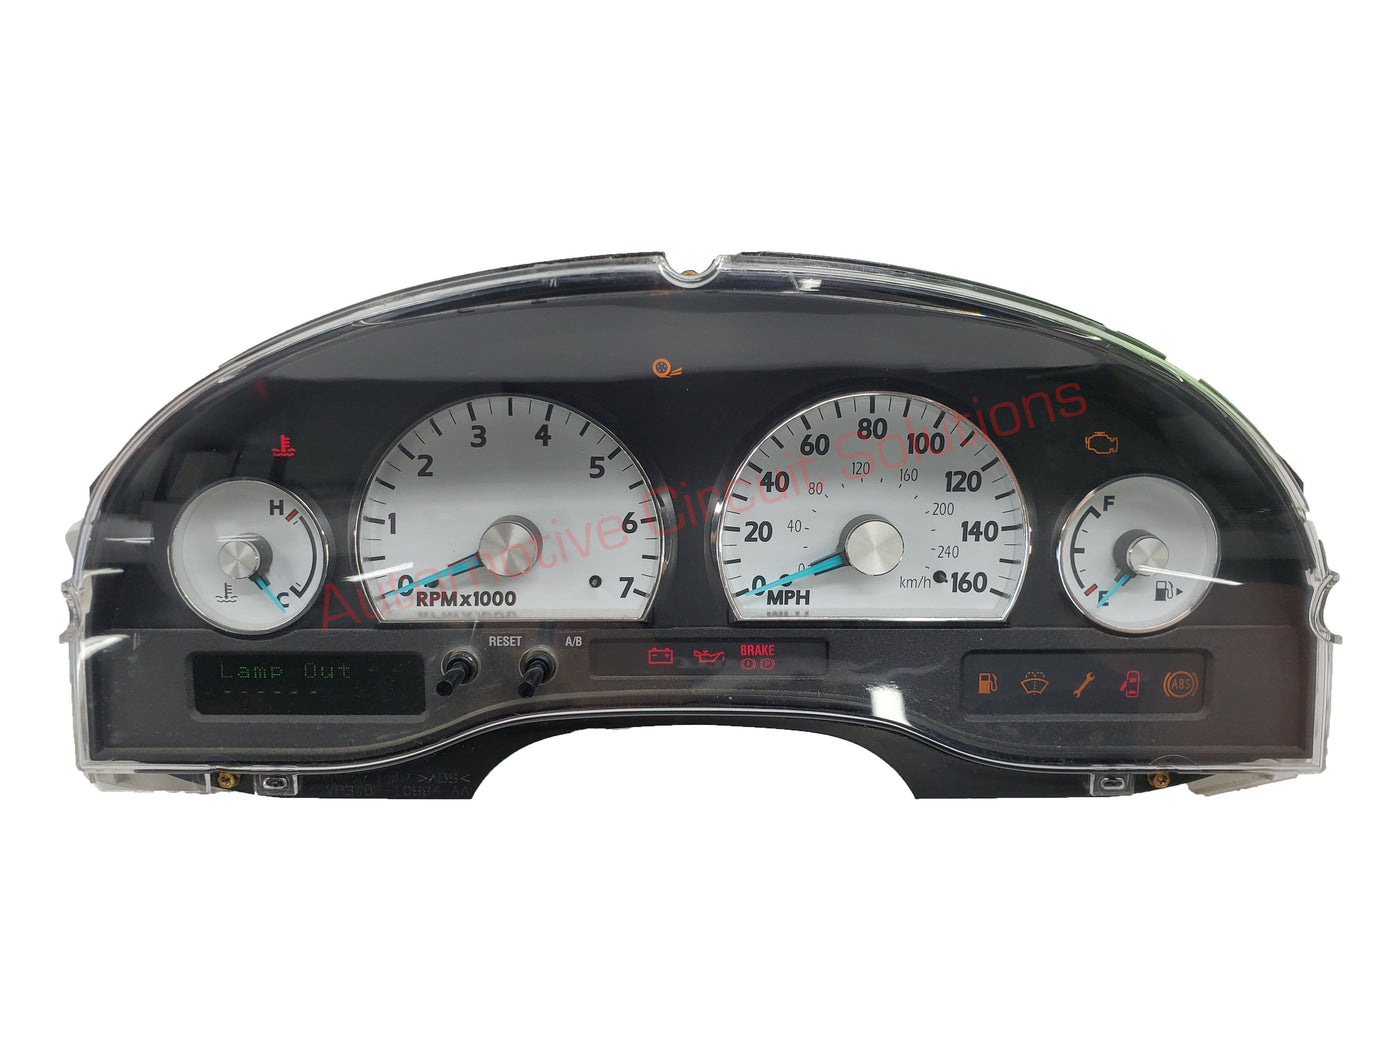 2004-2005 Ford Thunderbird Instrument Cluster Speedometer Repair Service Cluster Repair Service Automotive Circuit Solutions 